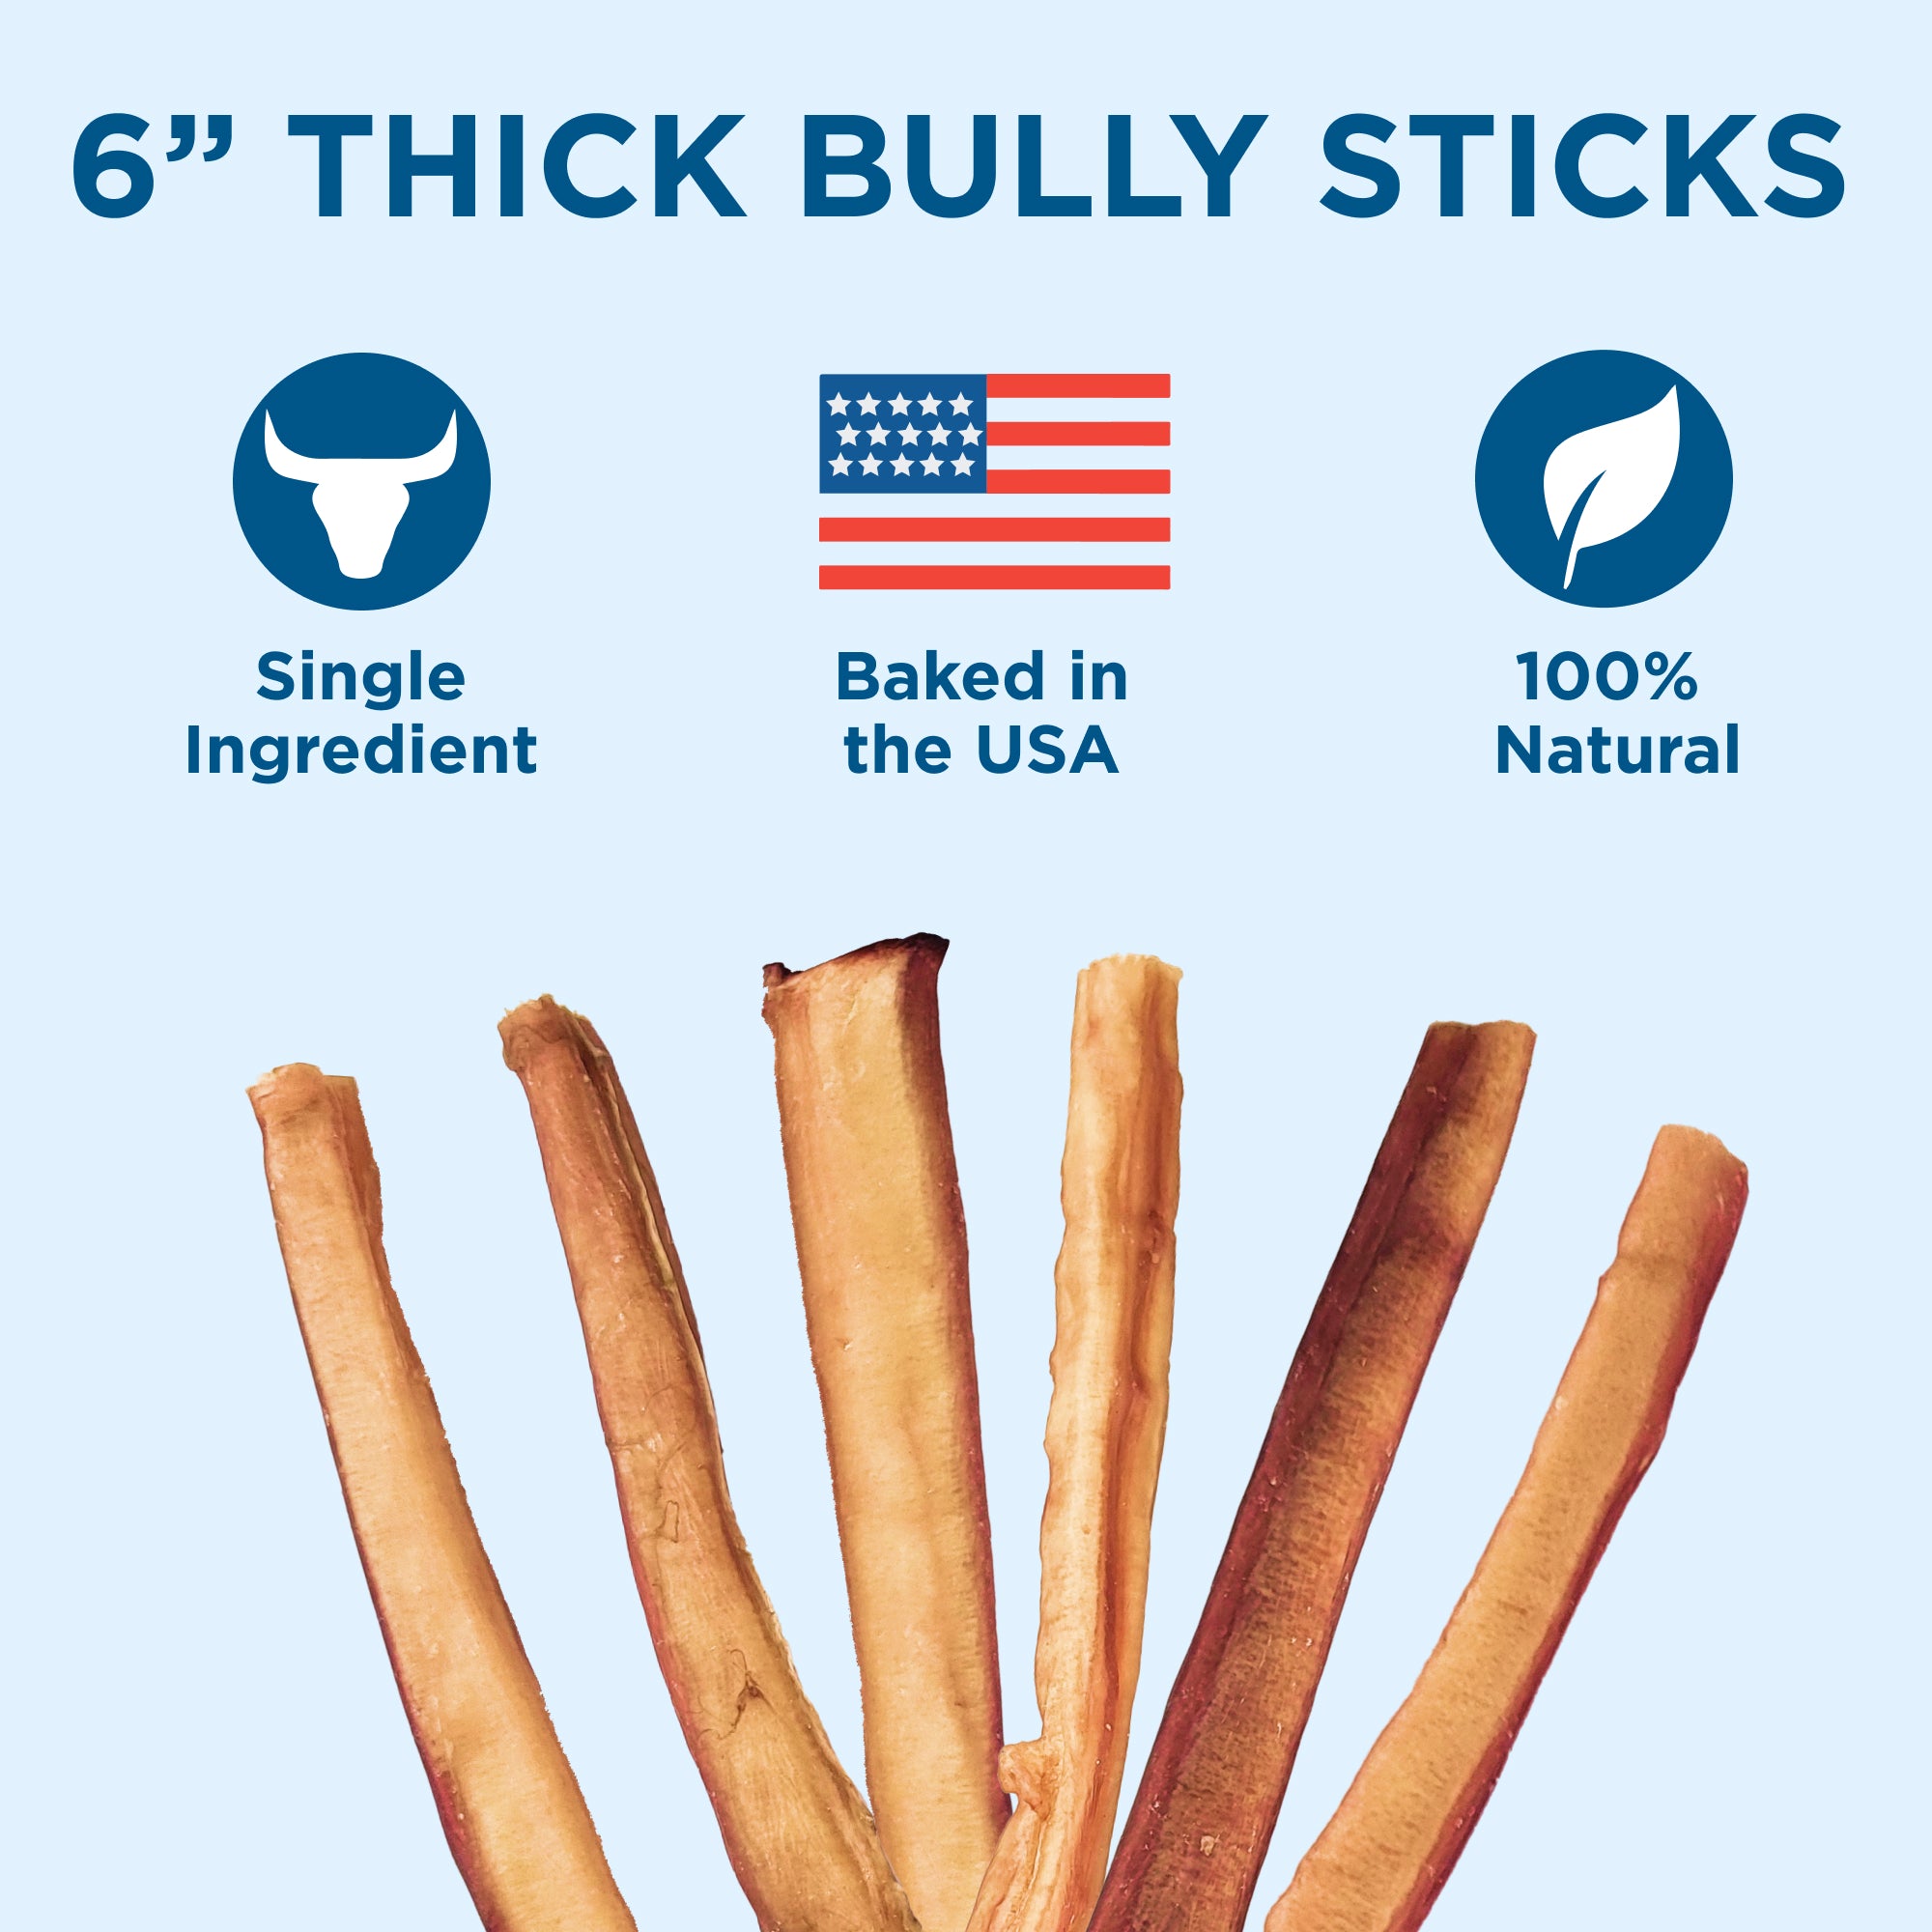 6-Inch Thick Bully Stick flavored dog harness by Best Bully Sticks.